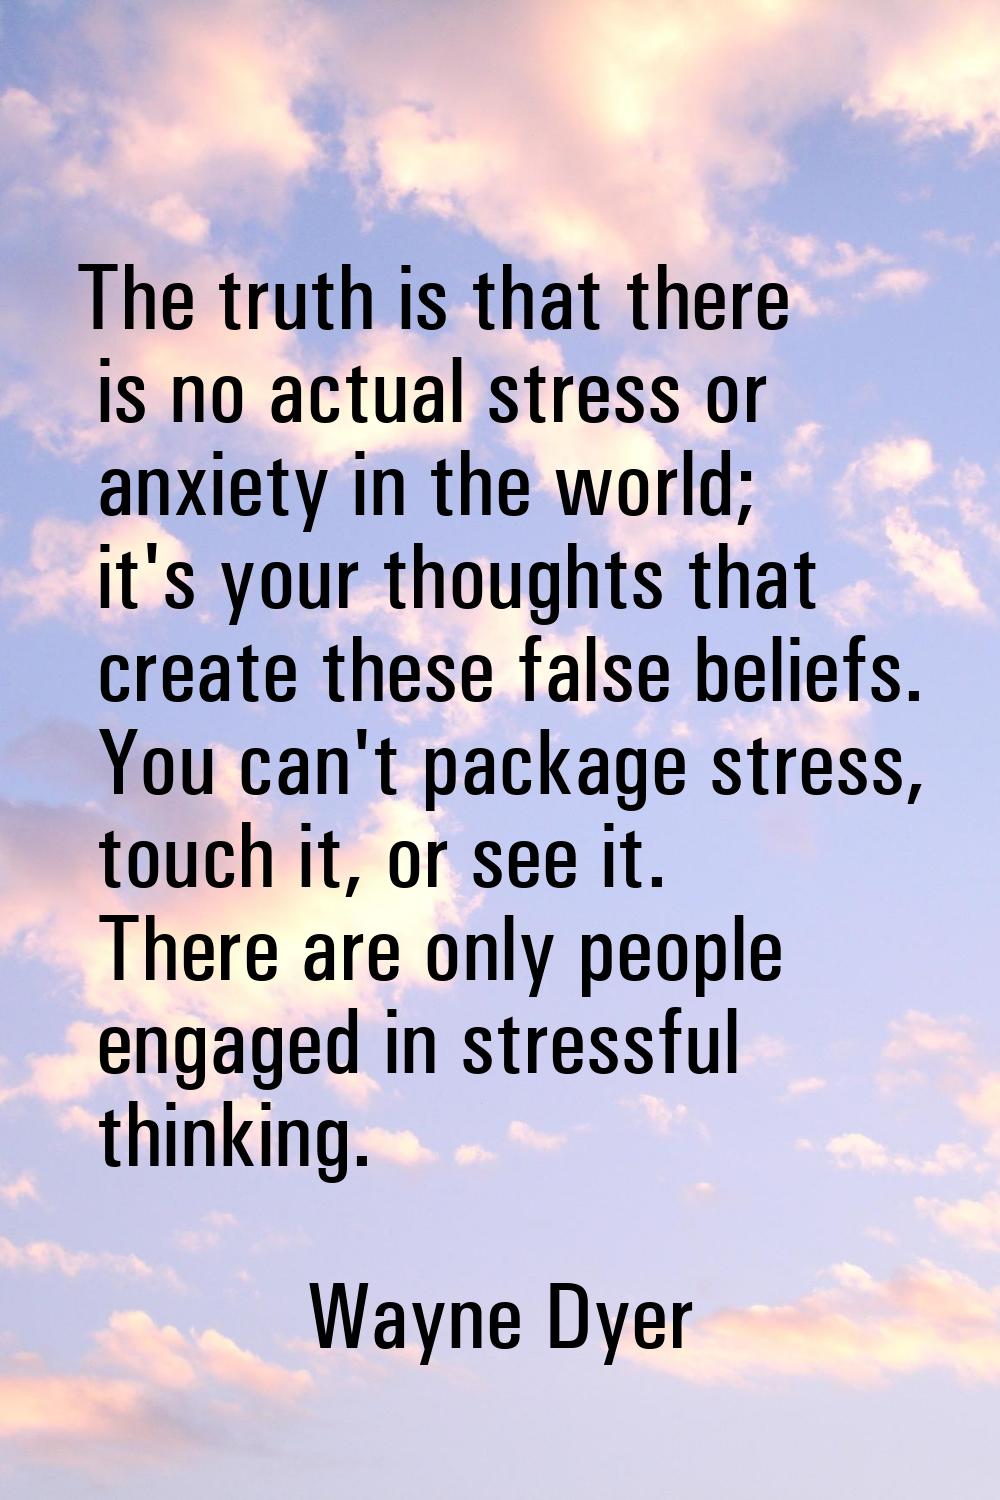 The truth is that there is no actual stress or anxiety in the world; it's your thoughts that create